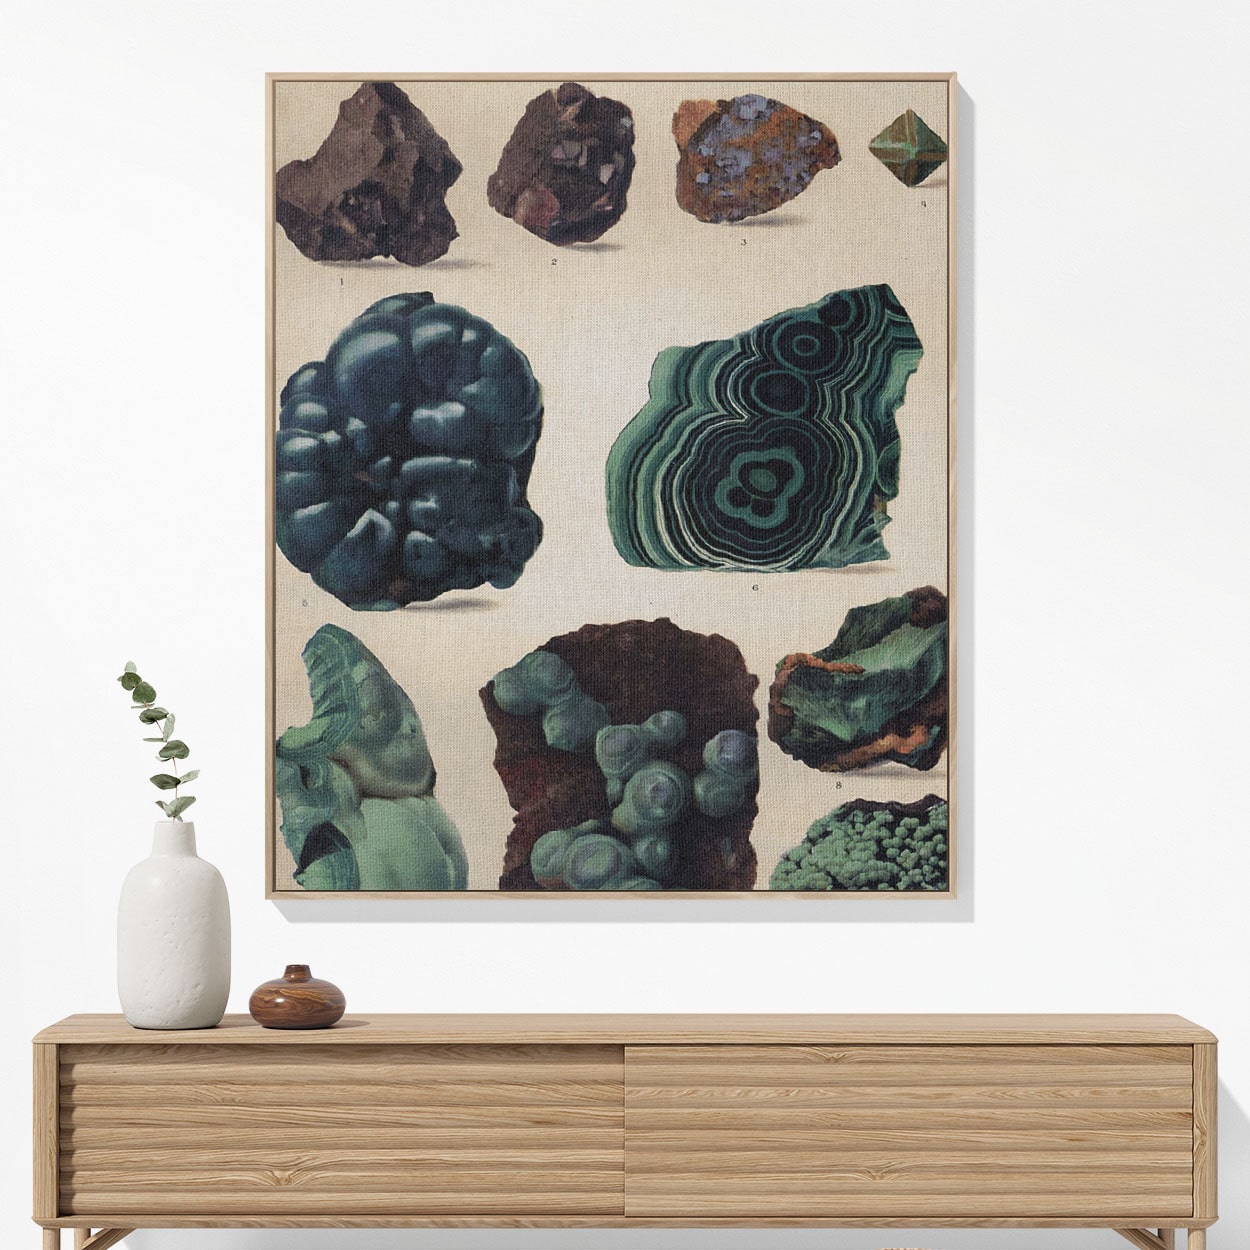 Dark Rocks and Jade Woven Blanket Woven Blanket Hanging on a Wall as Framed Wall Art